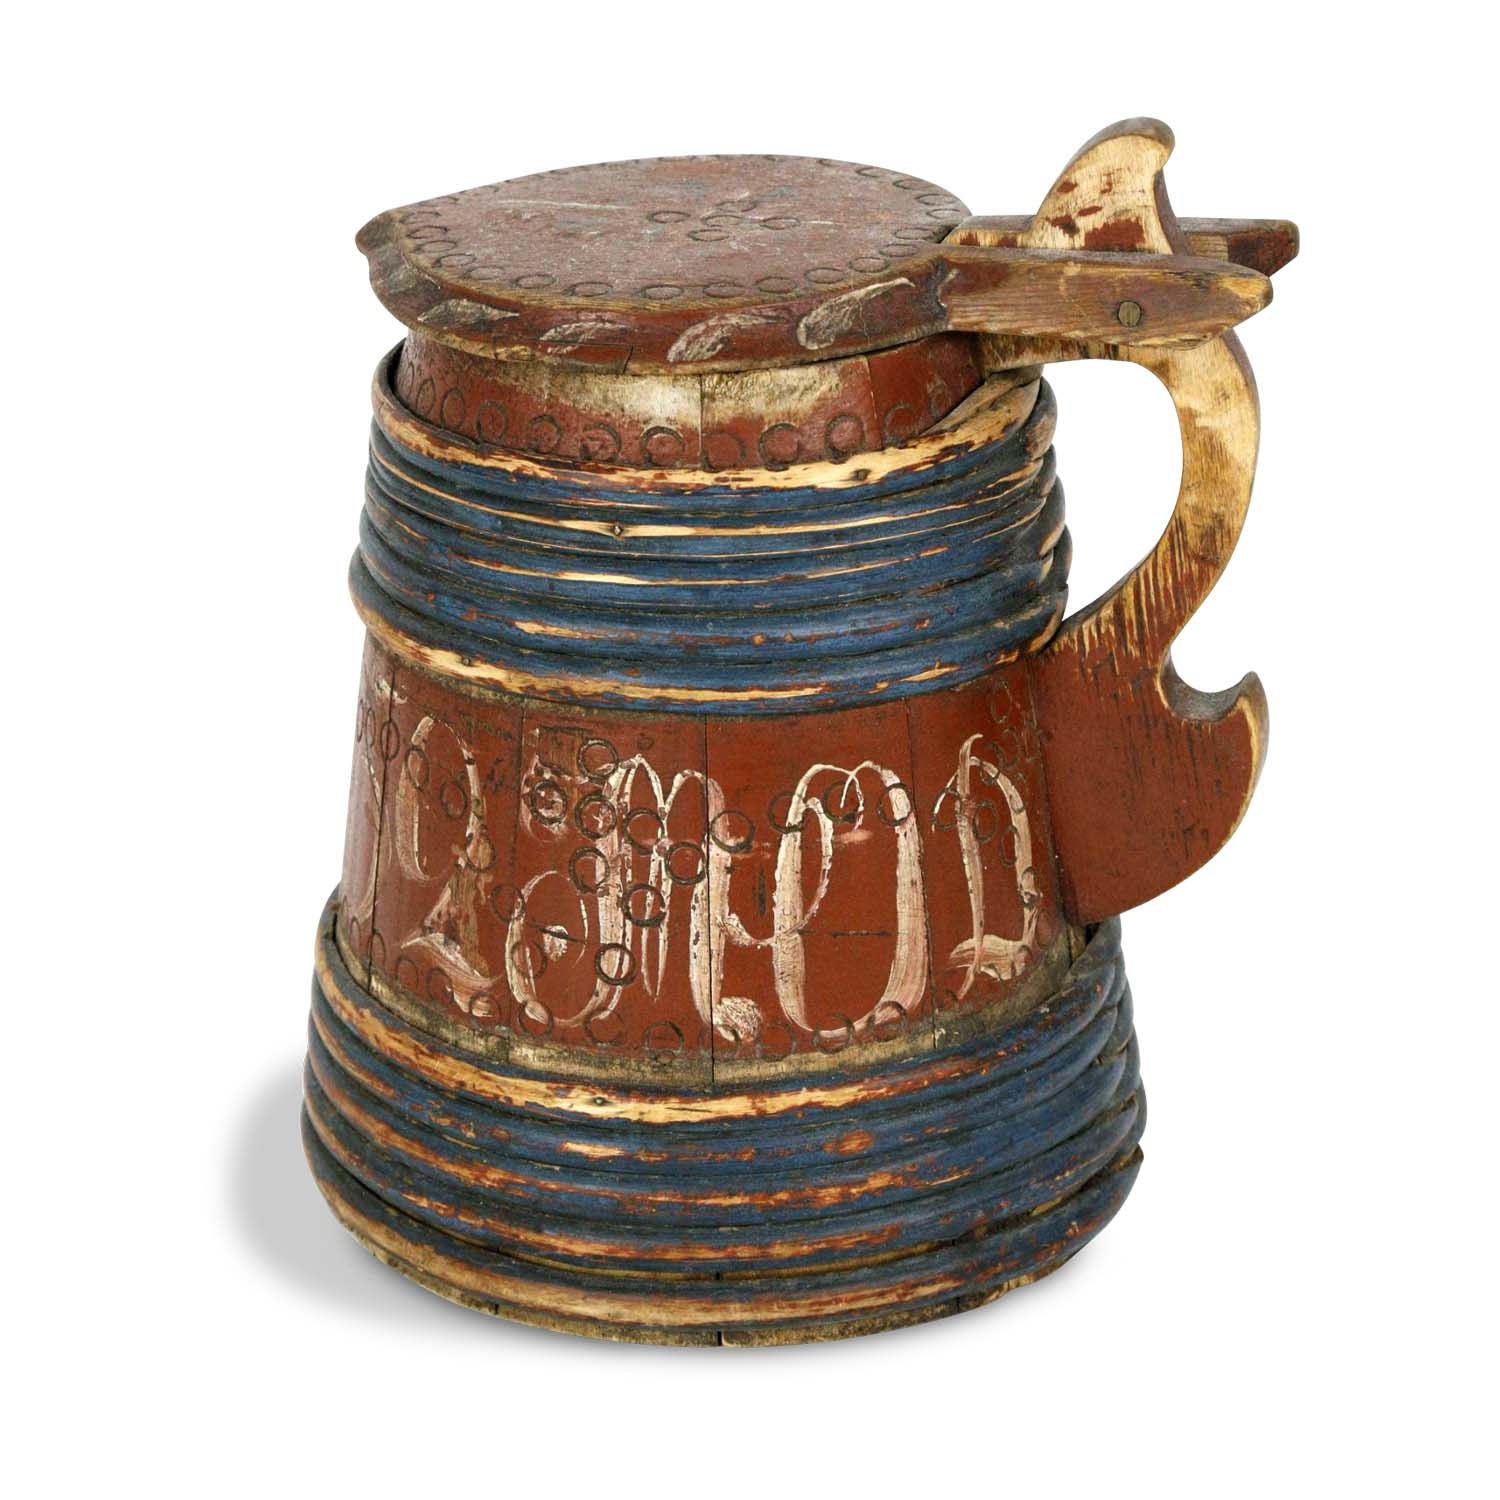 Wood Tankard and Metal Pitcher Painting